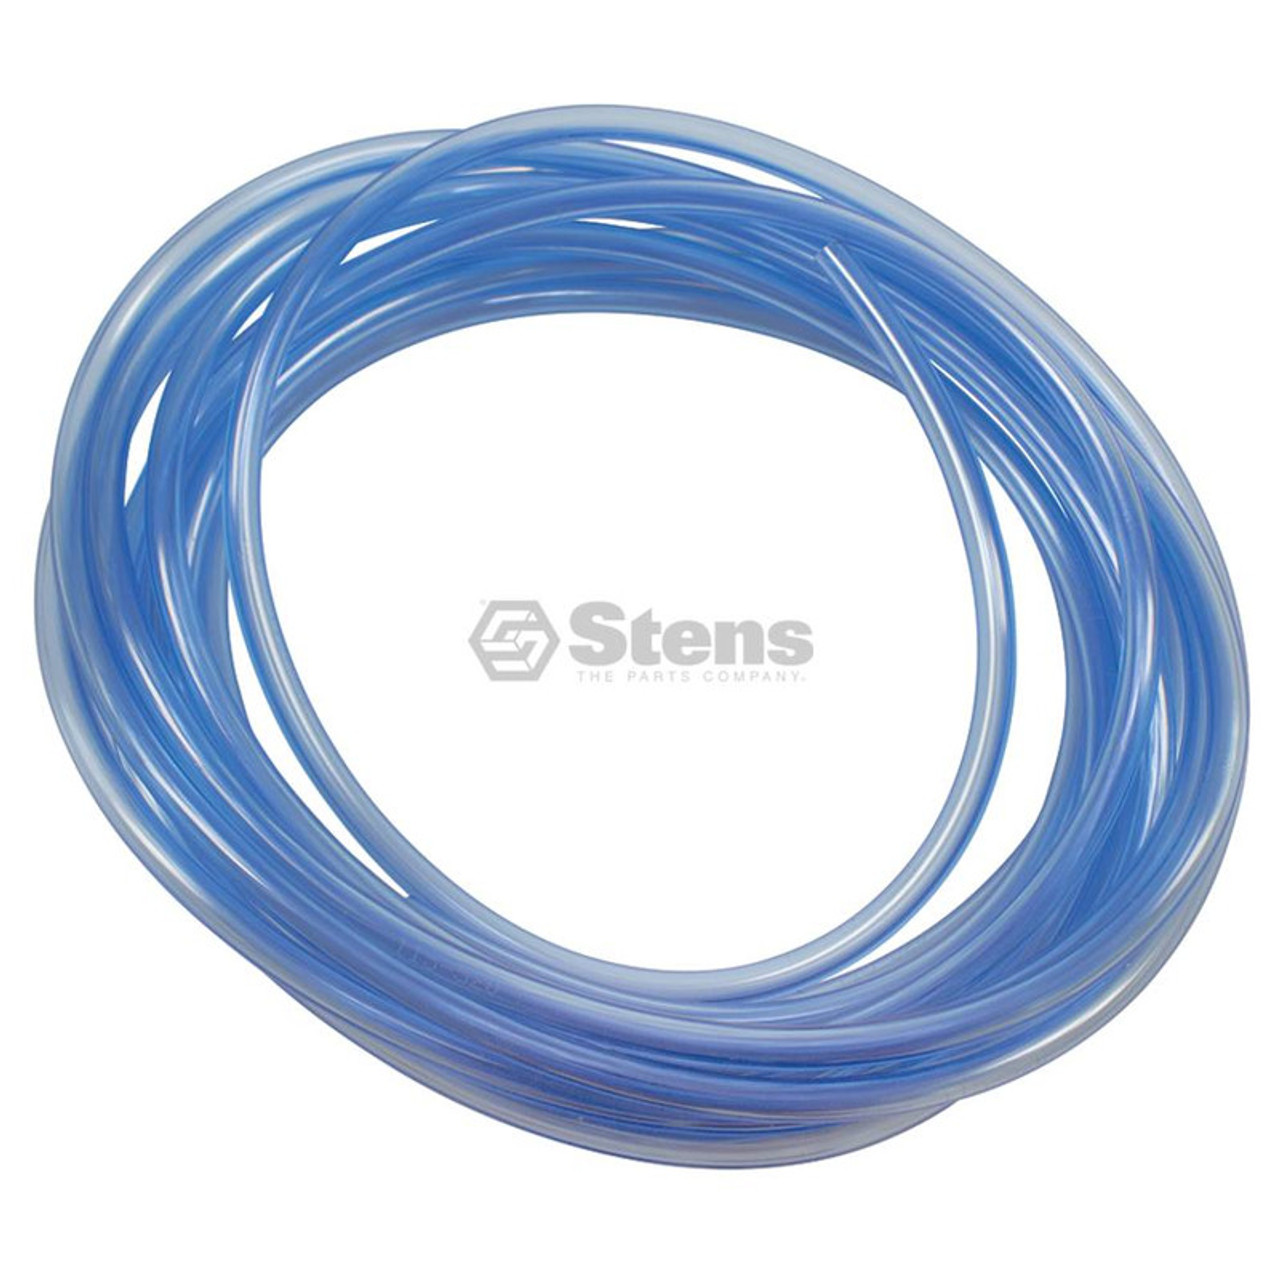 Fuel Line ID: 1/4" OD: 3/8", 25 feet long, Translucent blue, High quality, Resists swelling and hardening, Made in USA 115-524